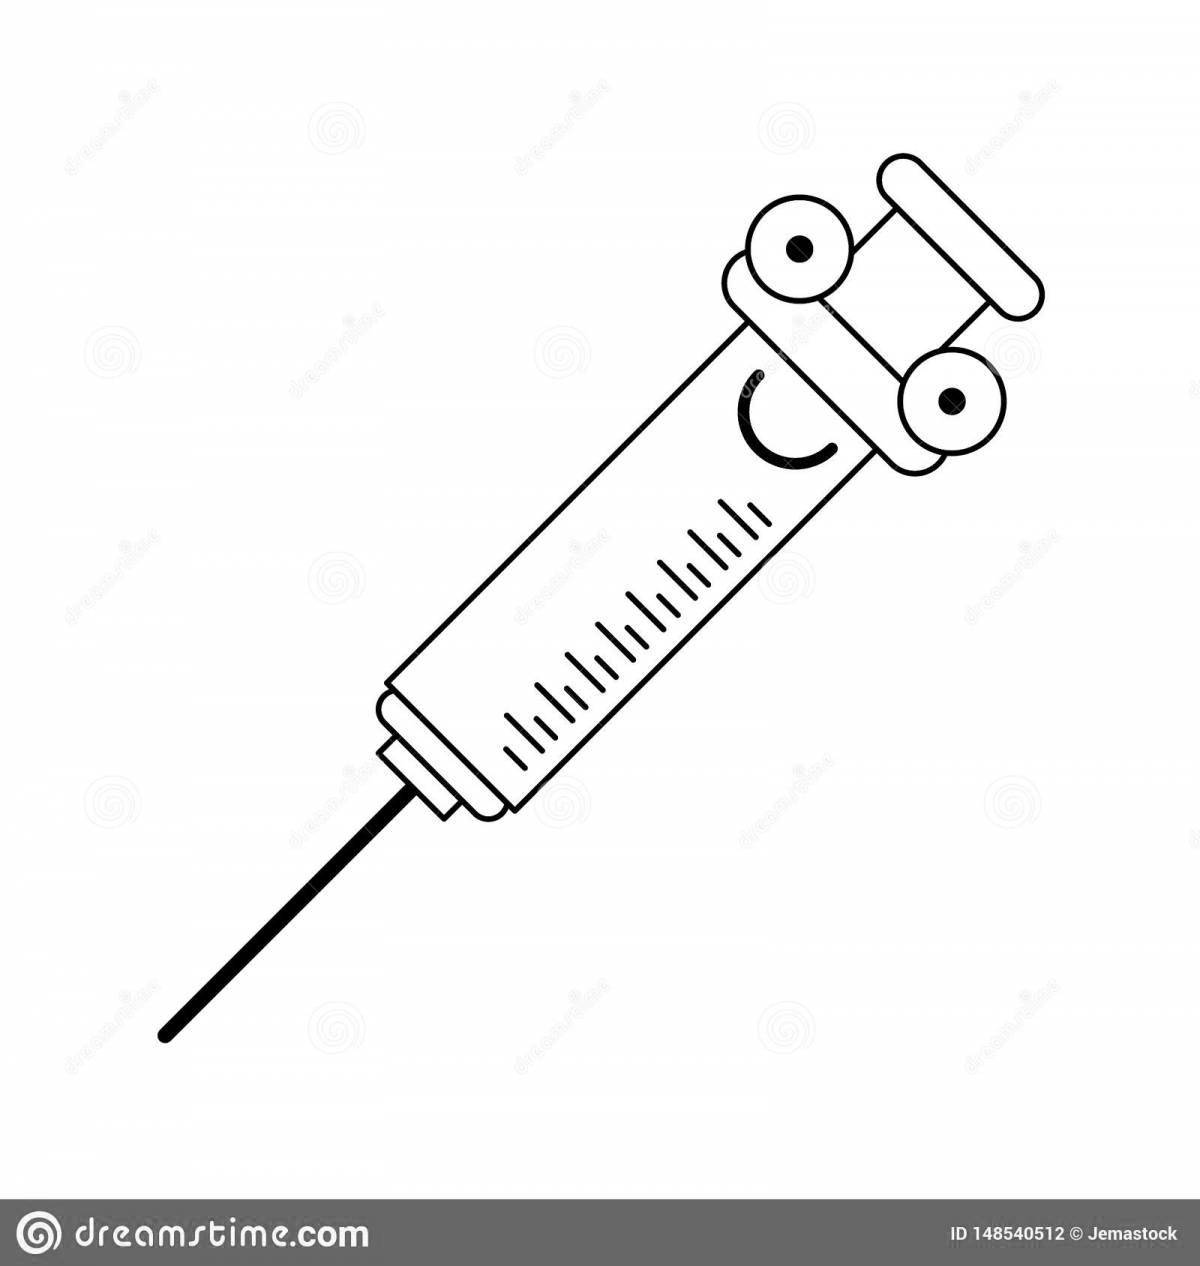 Coloring live syringe with a needle